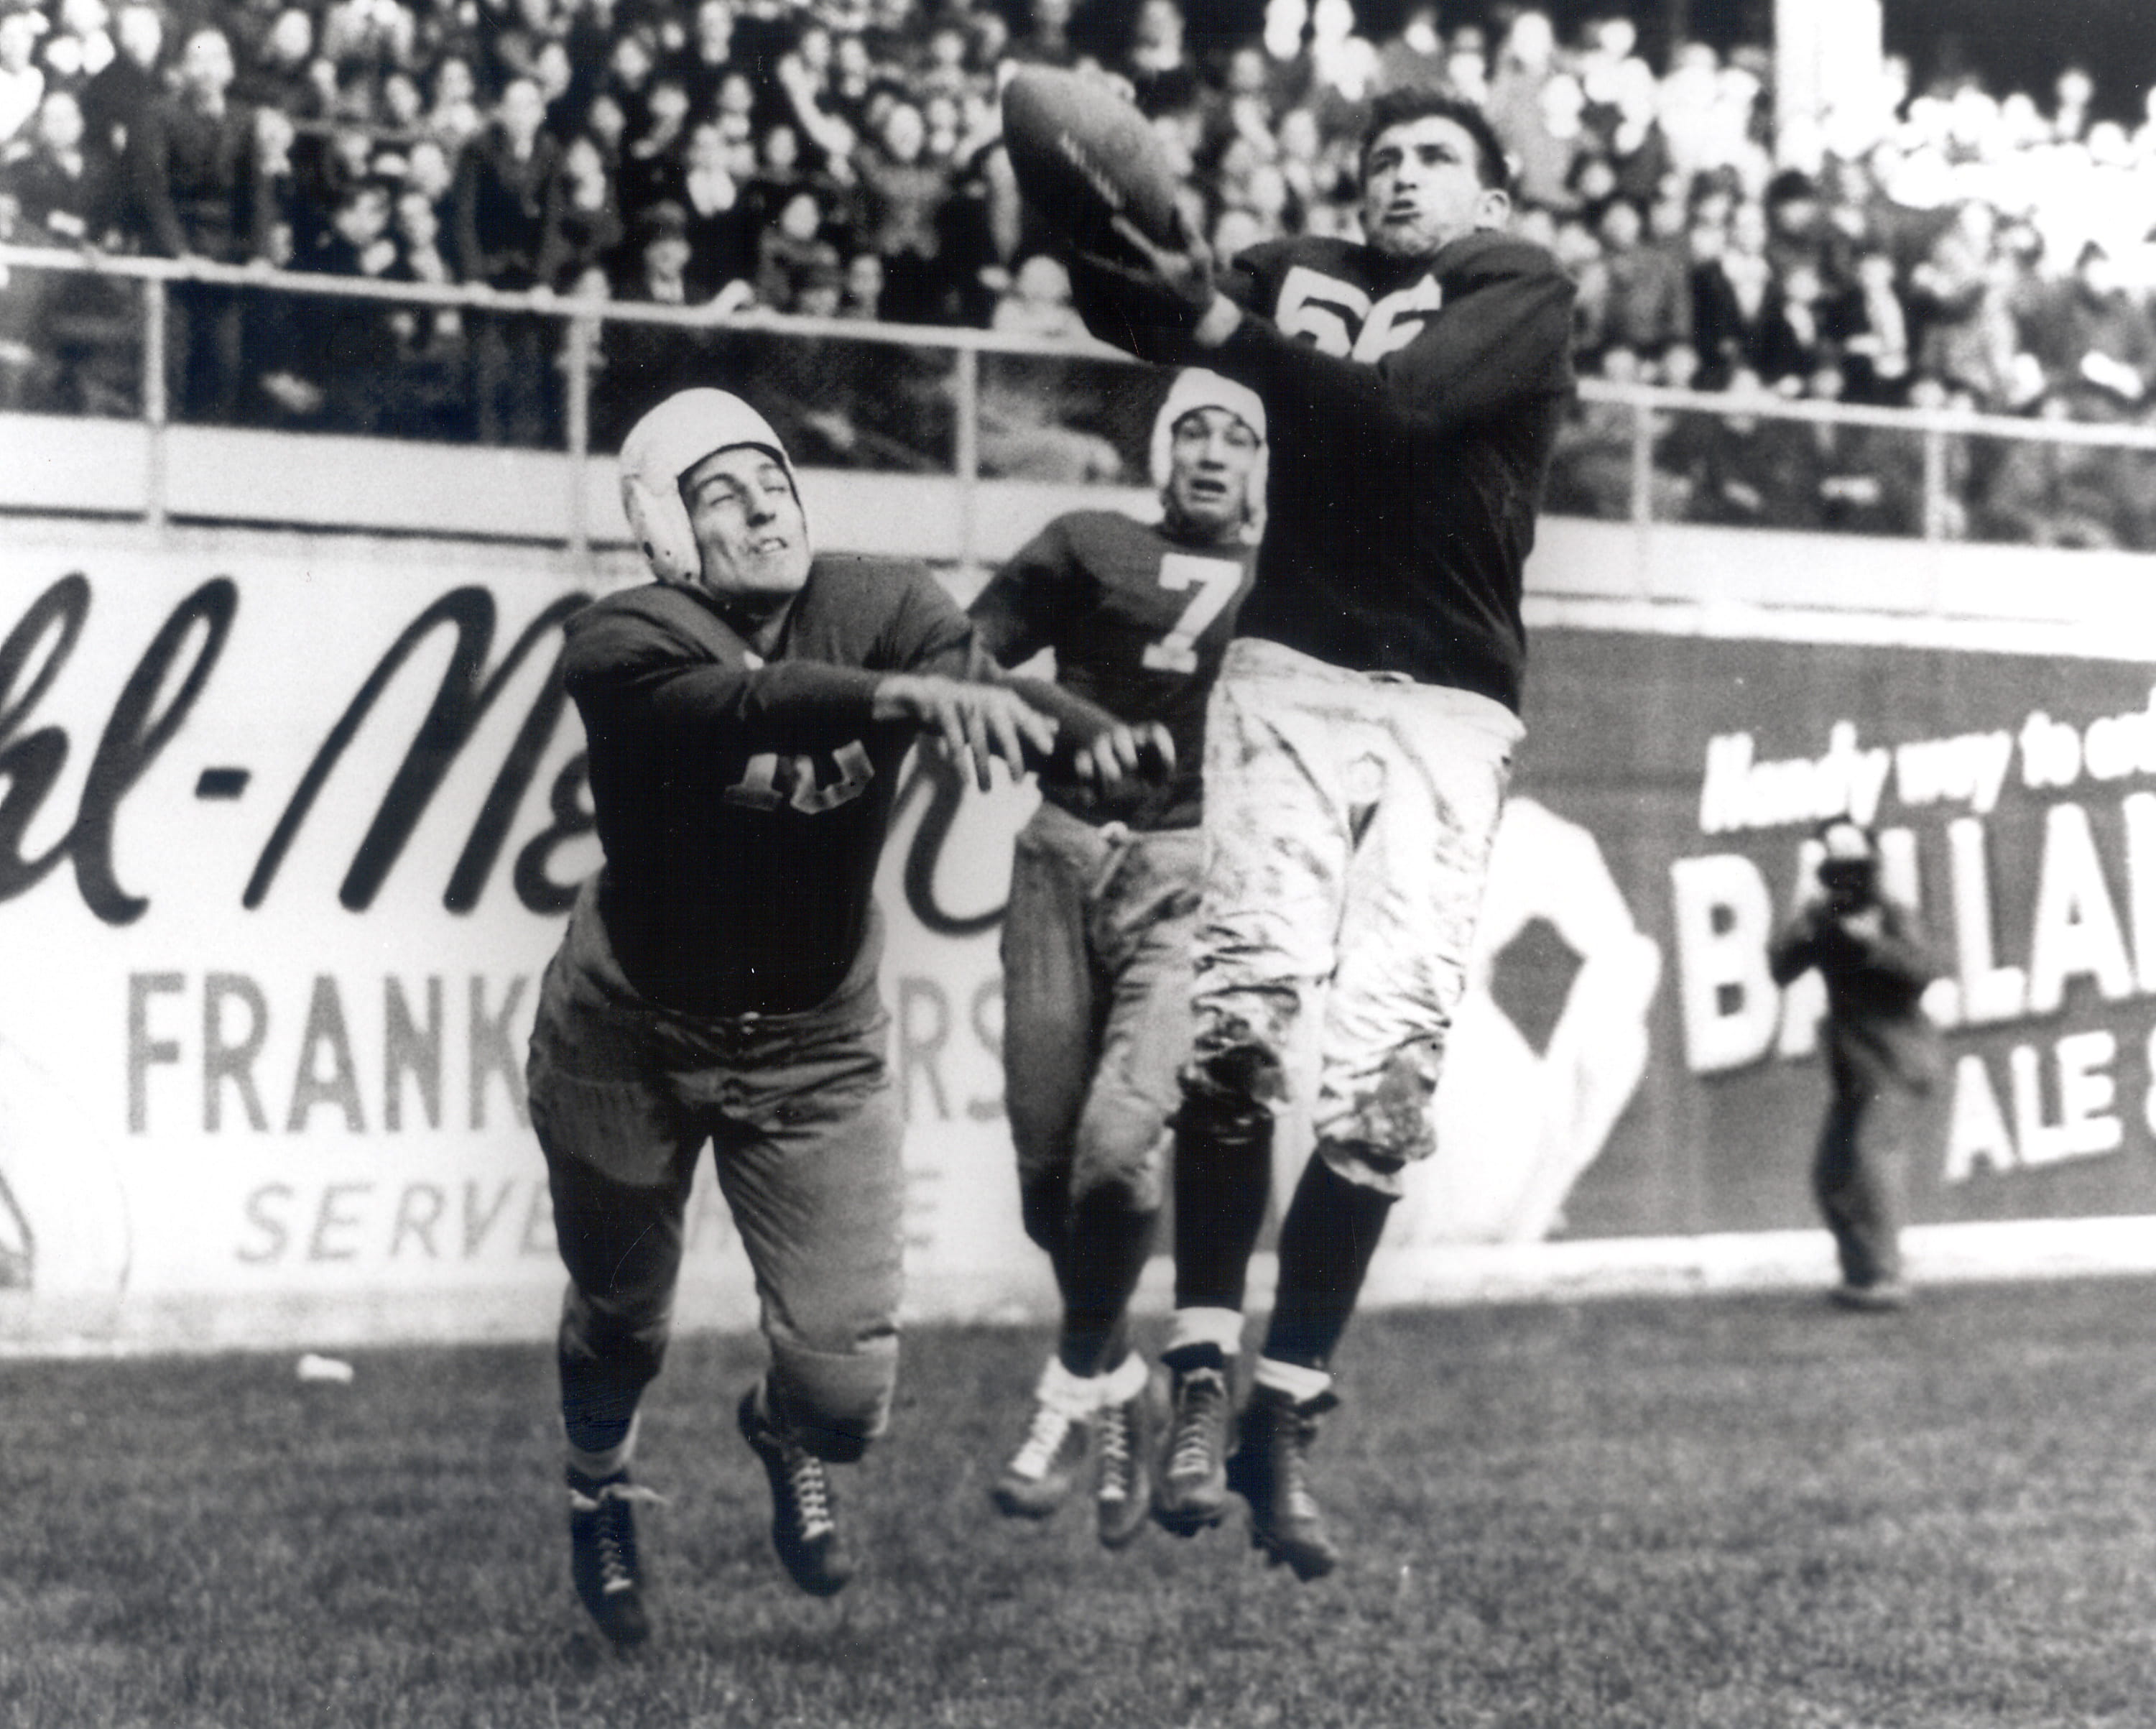 Bill Hewitt makes a catch for the Philadelphia Eagles against the Brooklyn Dodgers in October 1939.